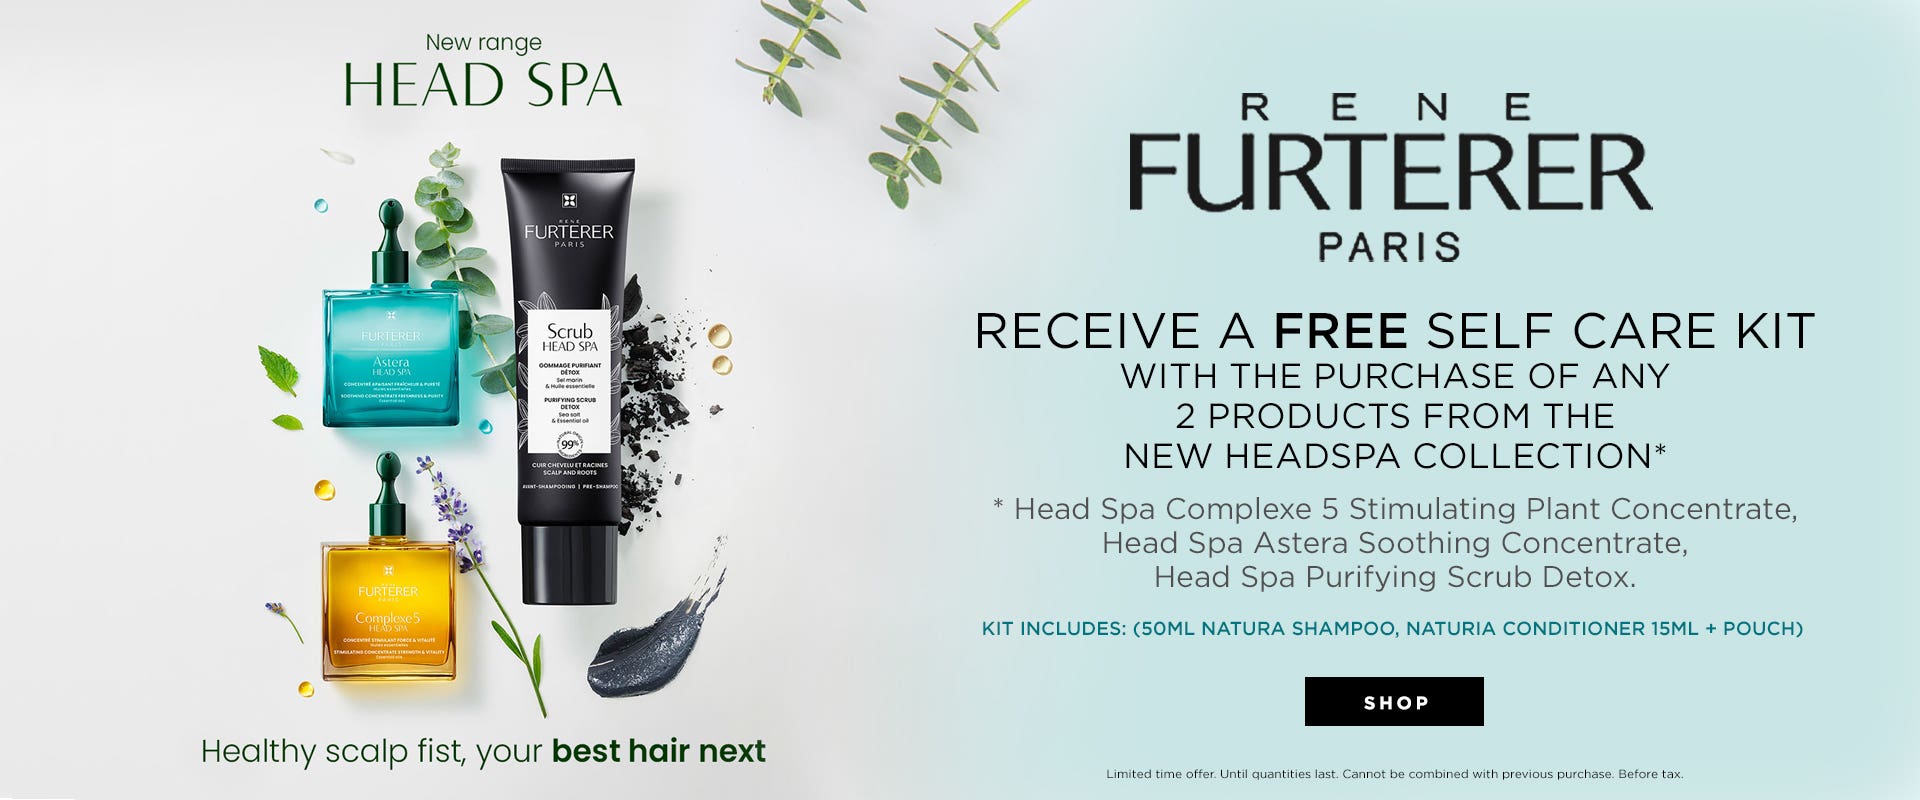 Receive a FREE Self Care Kit with the purchase of any 2 products from the new HeadSpa Collection*.